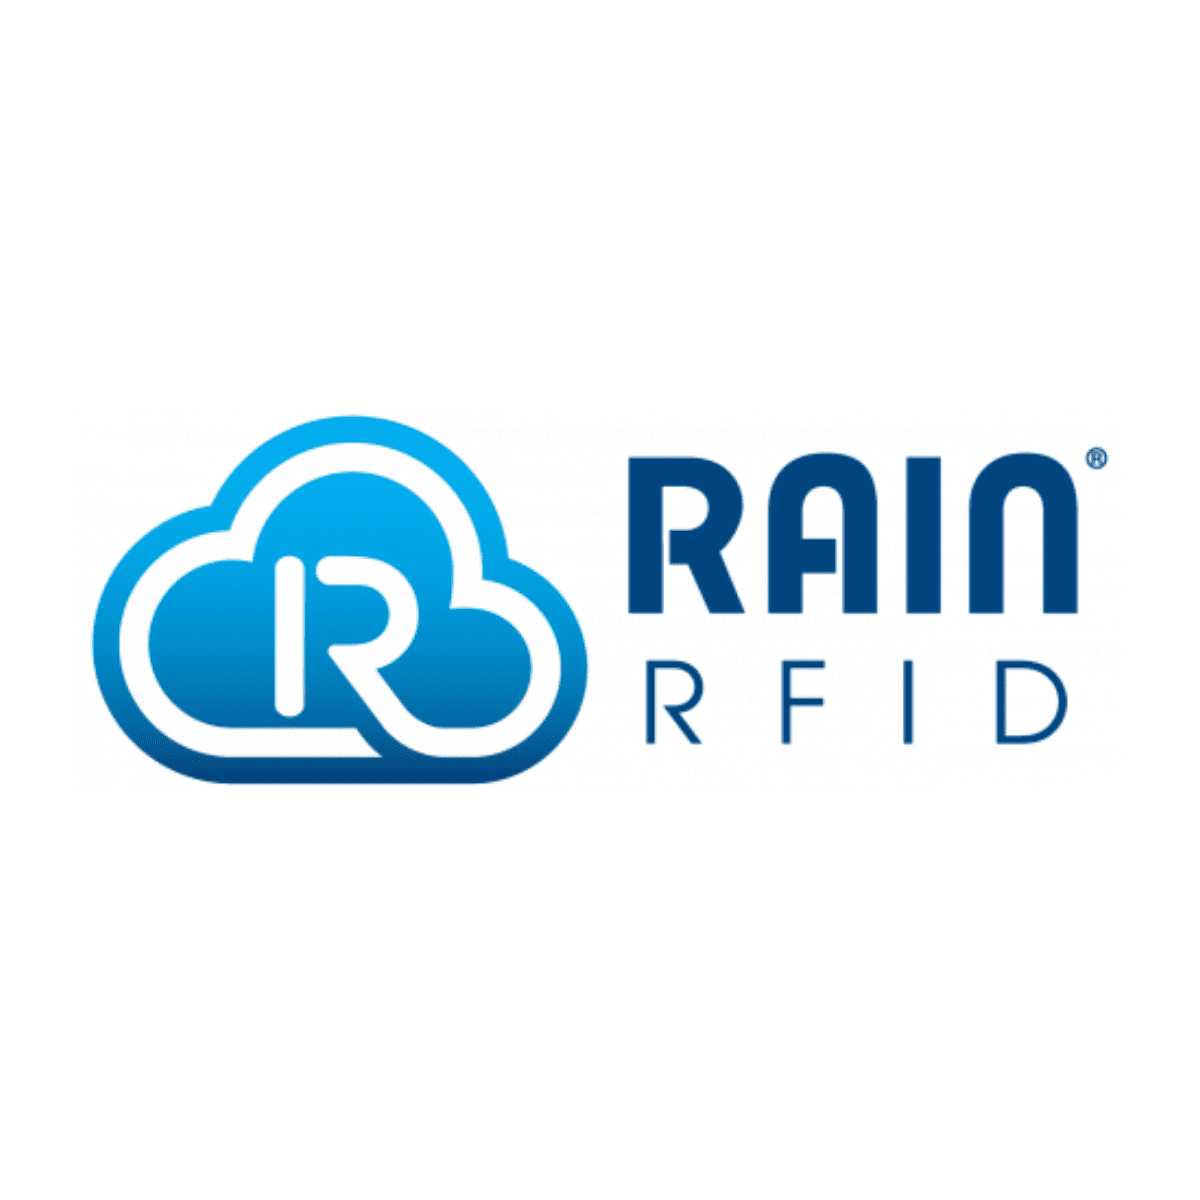 Corso Magenta participates in an online conference organized by RAIN RFID Alliances